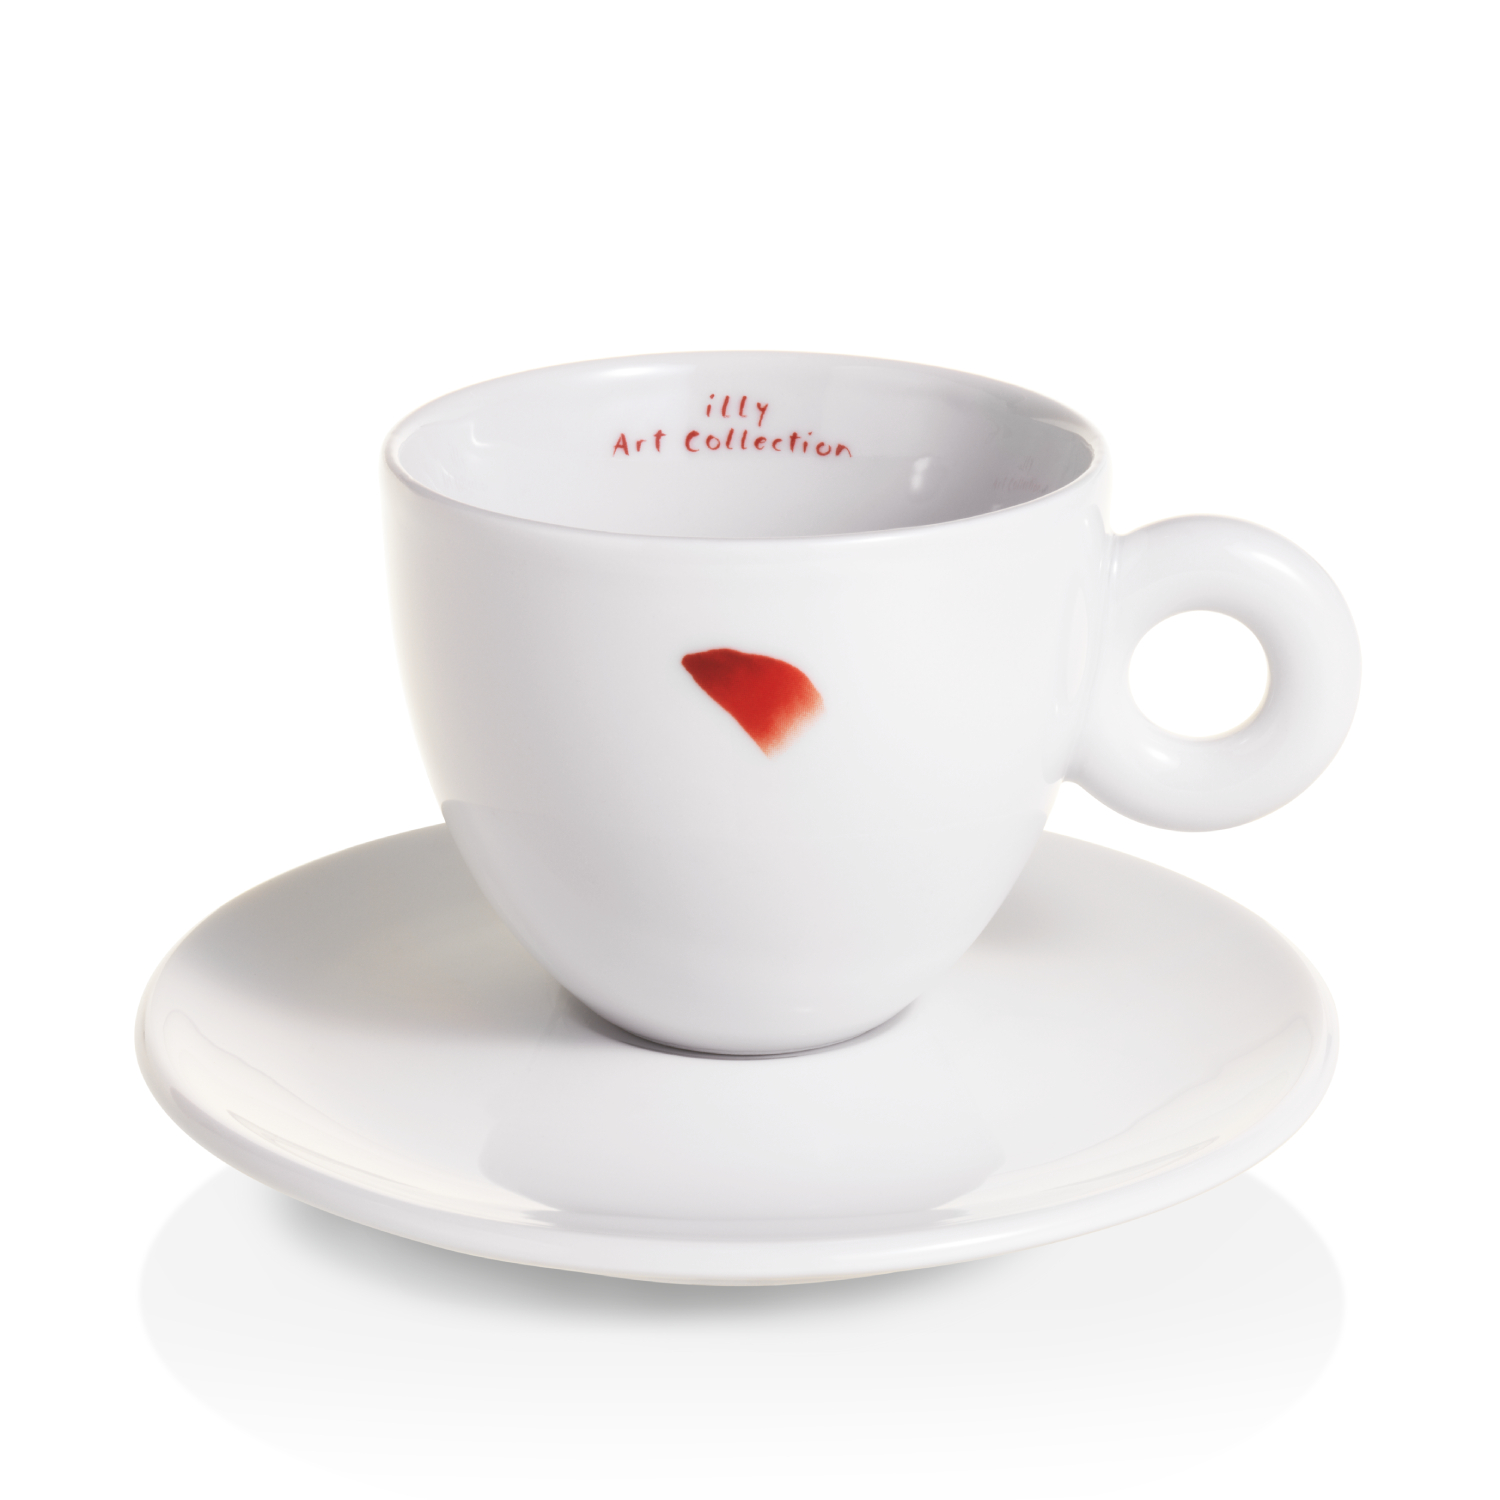 illy Art Collection LEE UFAN Gift Set 2 Cappuccino Cups, Cups, 02-02-2018